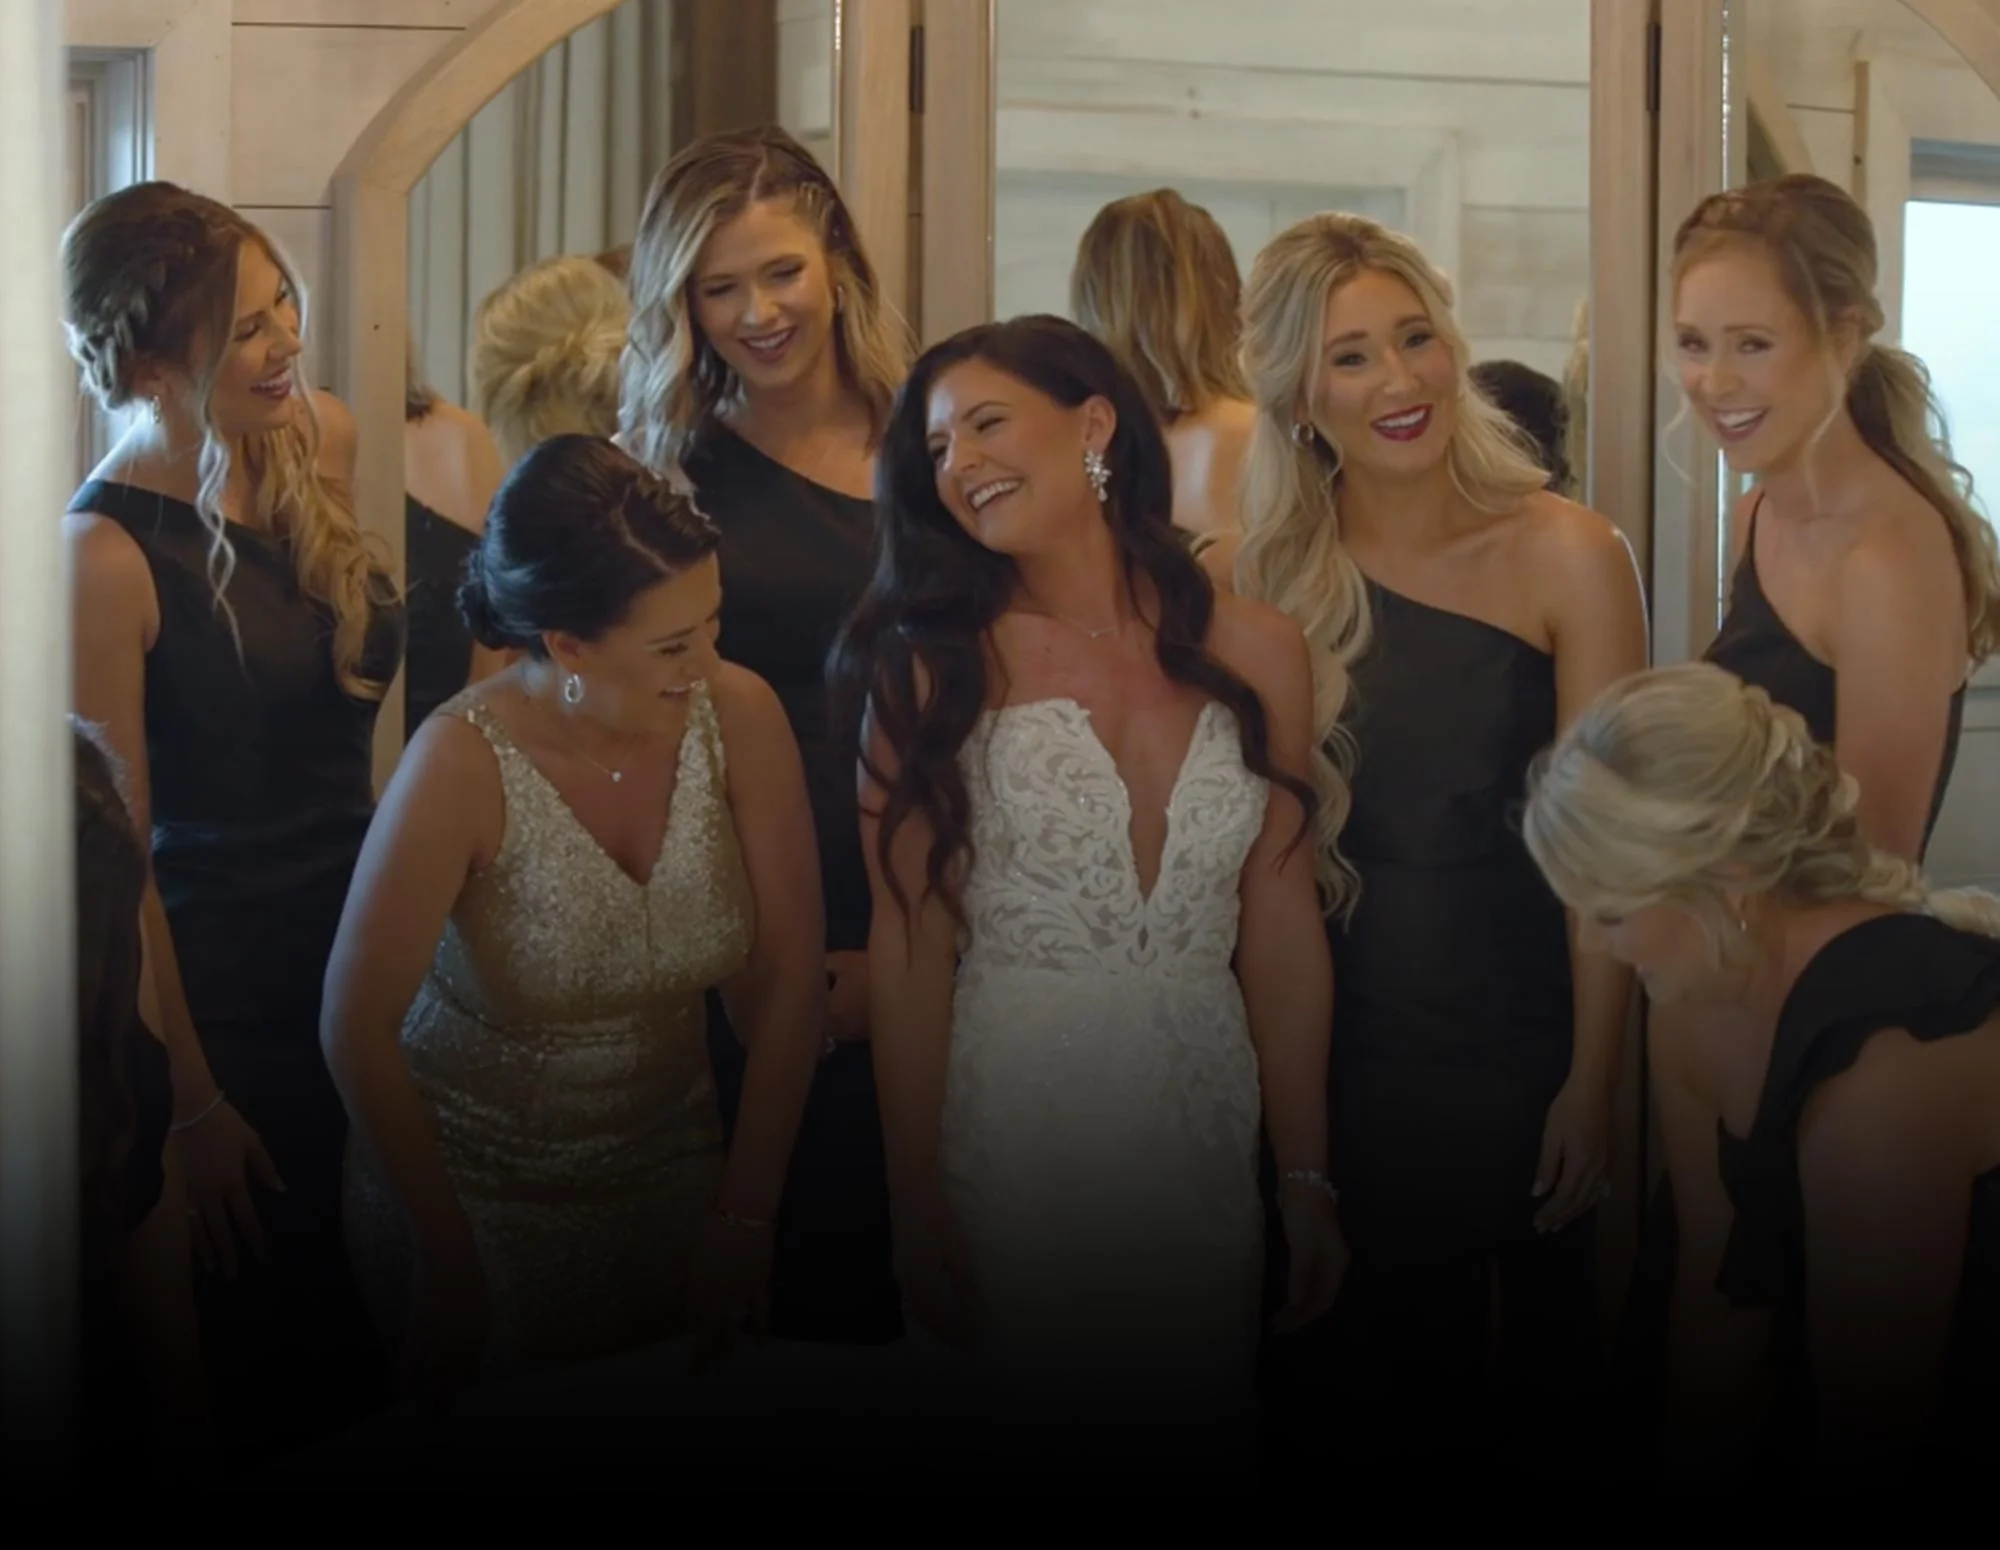 A photo of a bride and her bridal party.